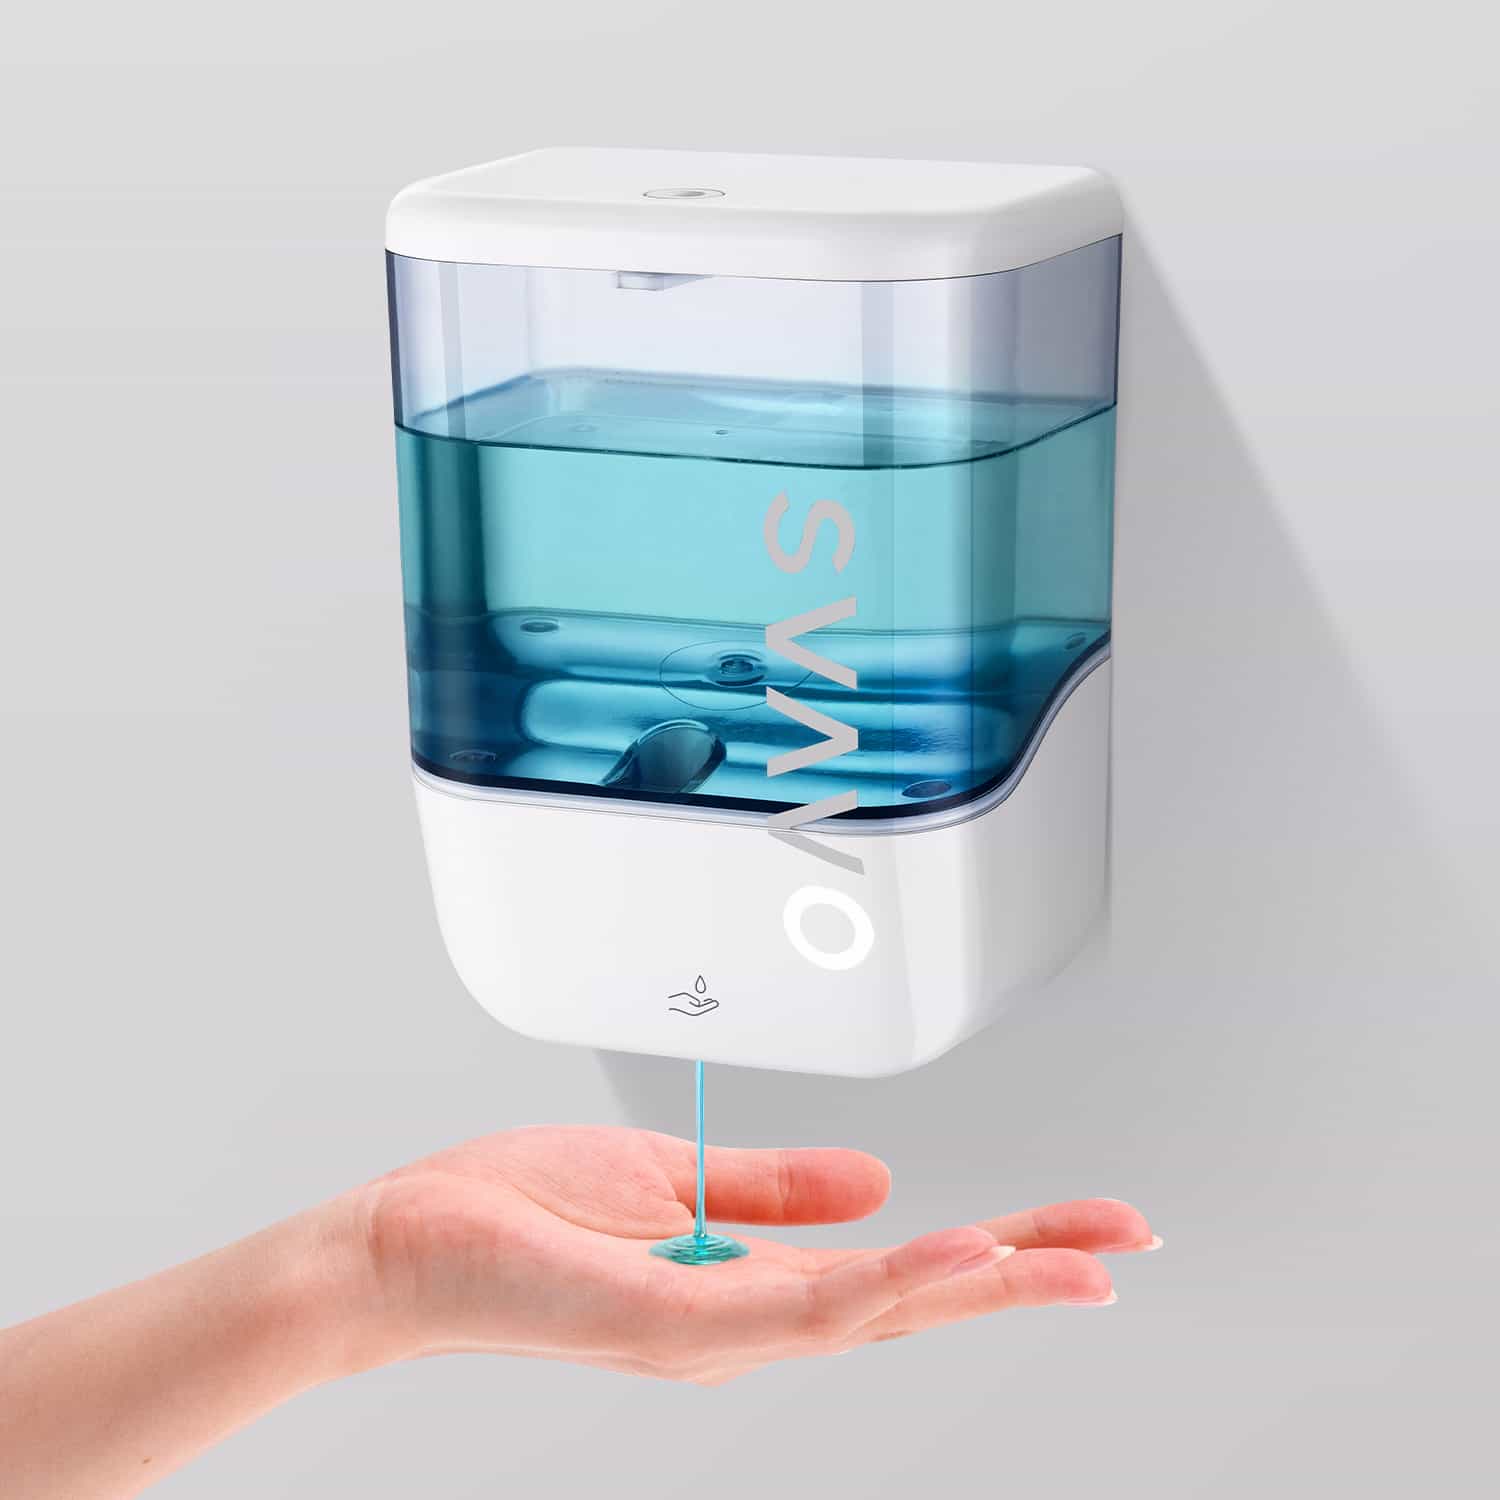 Wall mounted Automatic Liquid Soap Dispenser OS-0410  